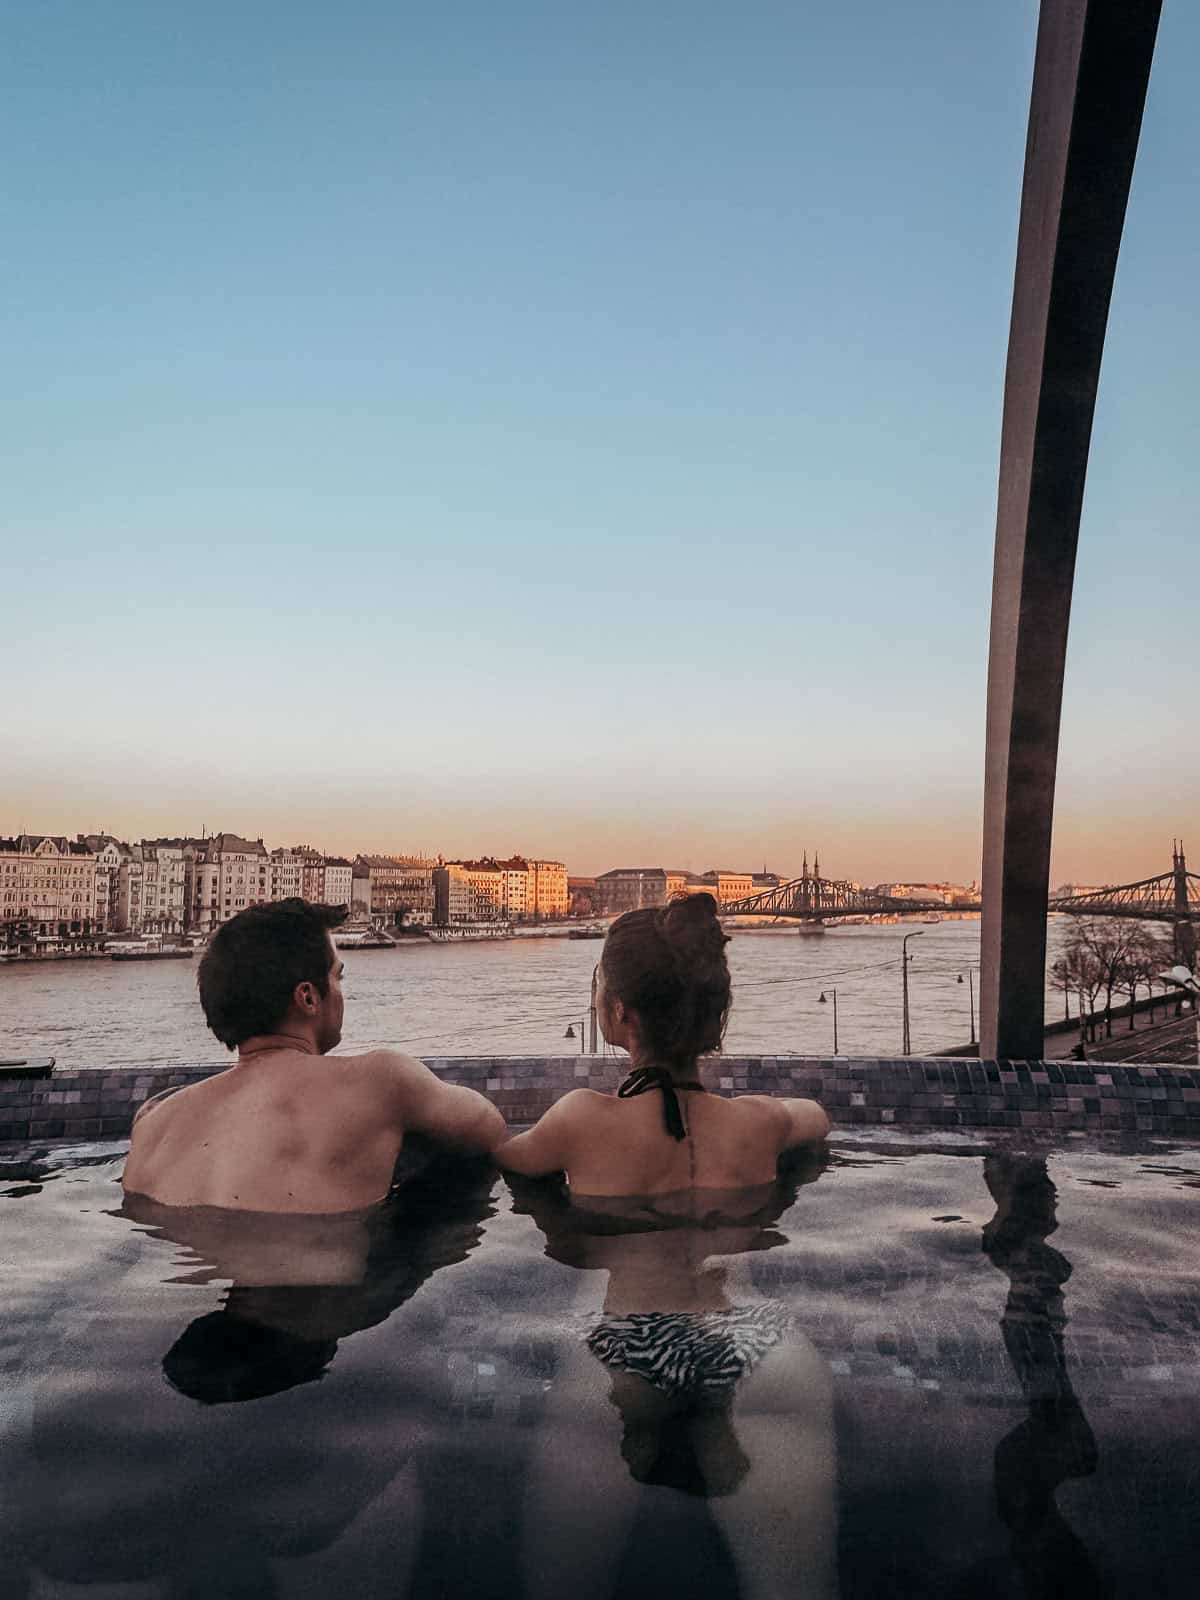 A couple is relaxing in an outdoor hot tub overlooking the Danube River and Budapest at sunset.